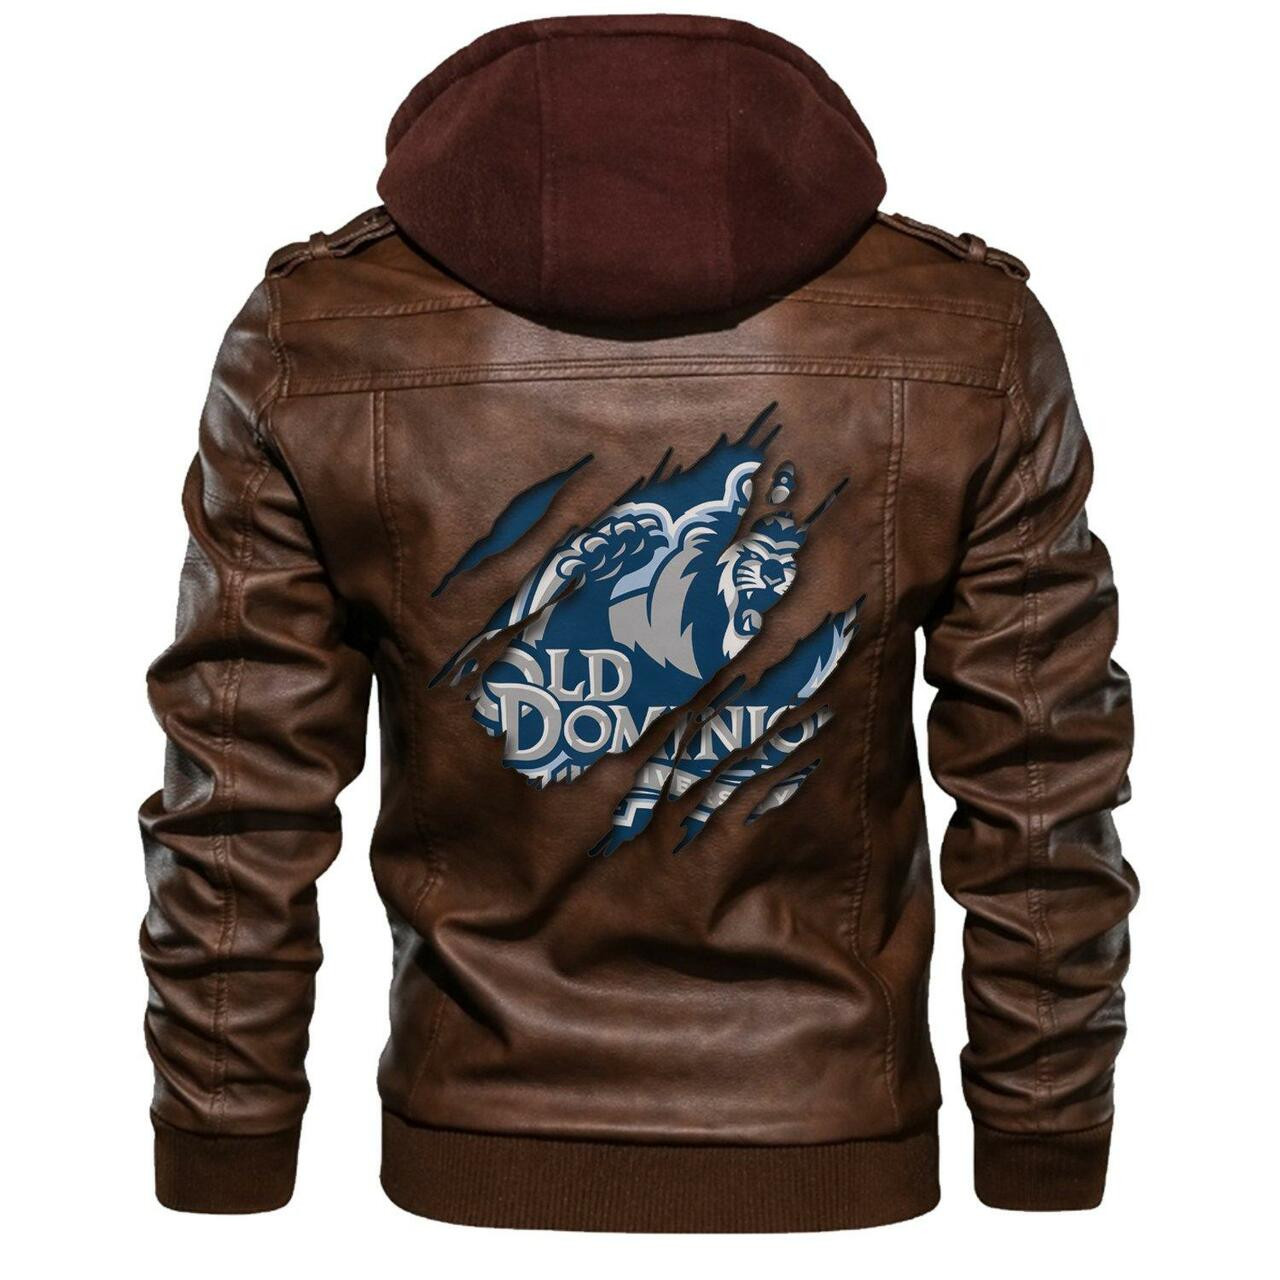 You can find Leather Jacket online at a great price 26